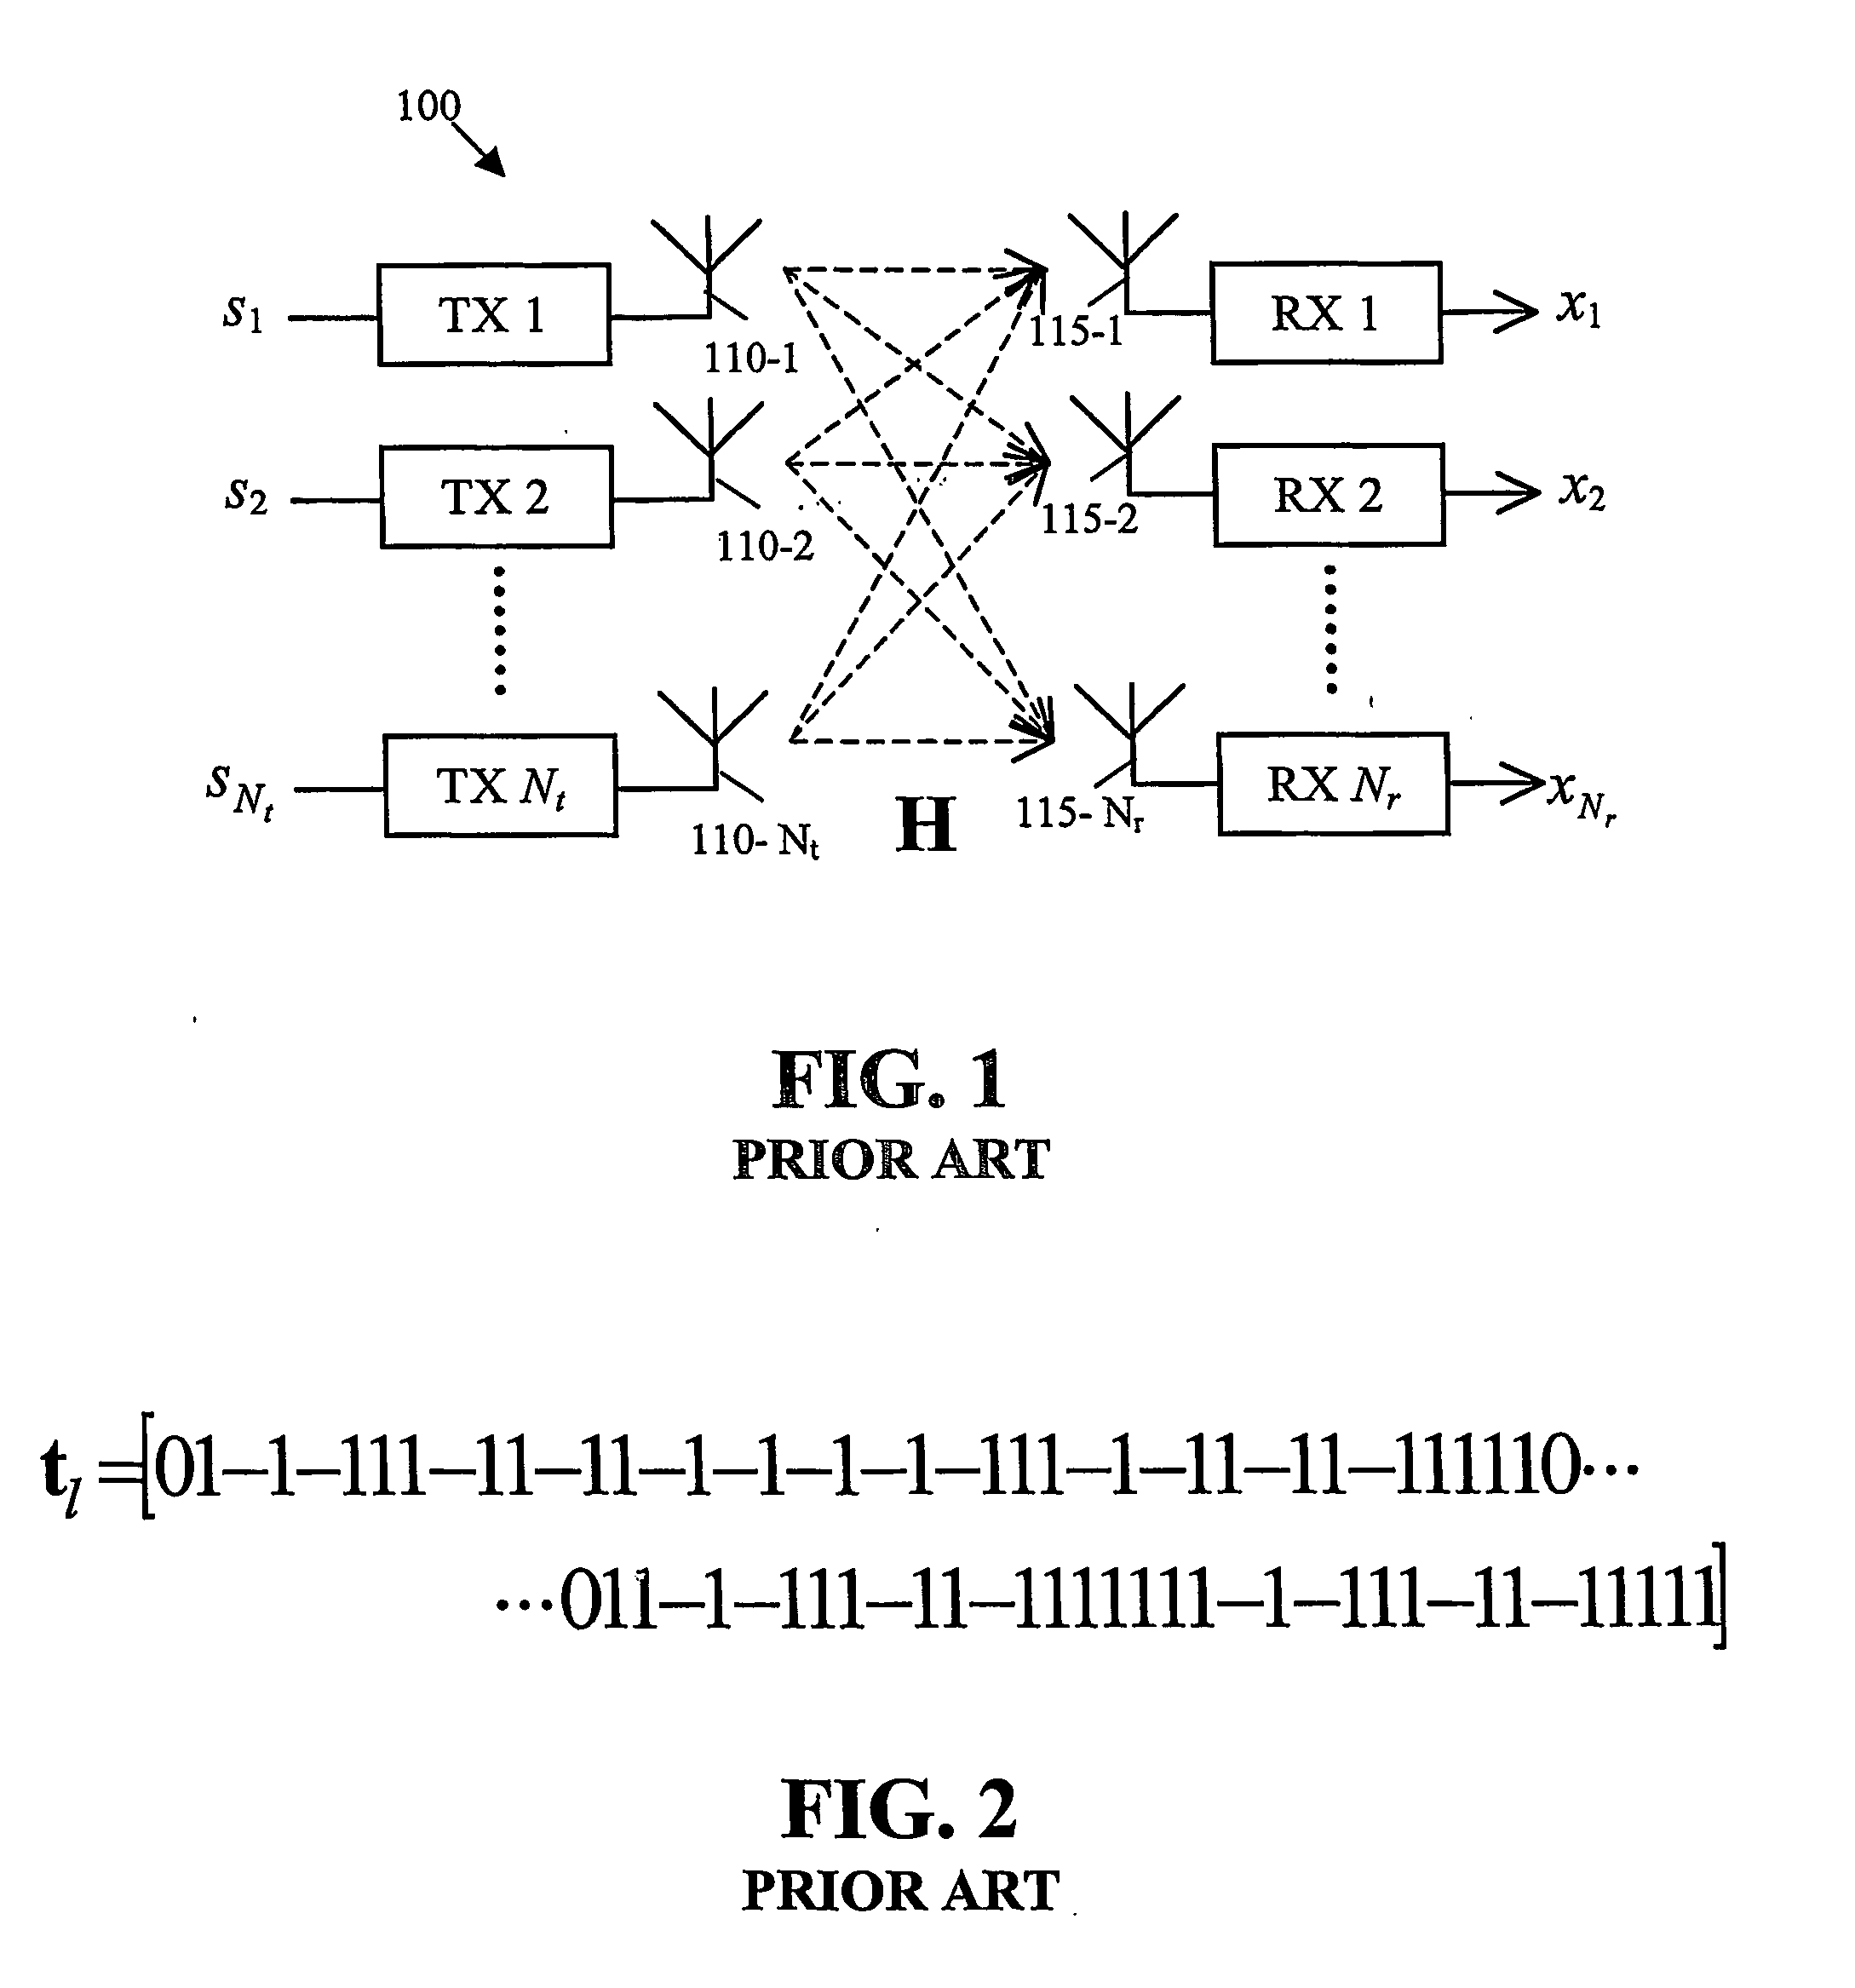 Methods and apparatus for backwards compatible communication in a multiple antenna communication system using time orthogonal symbols